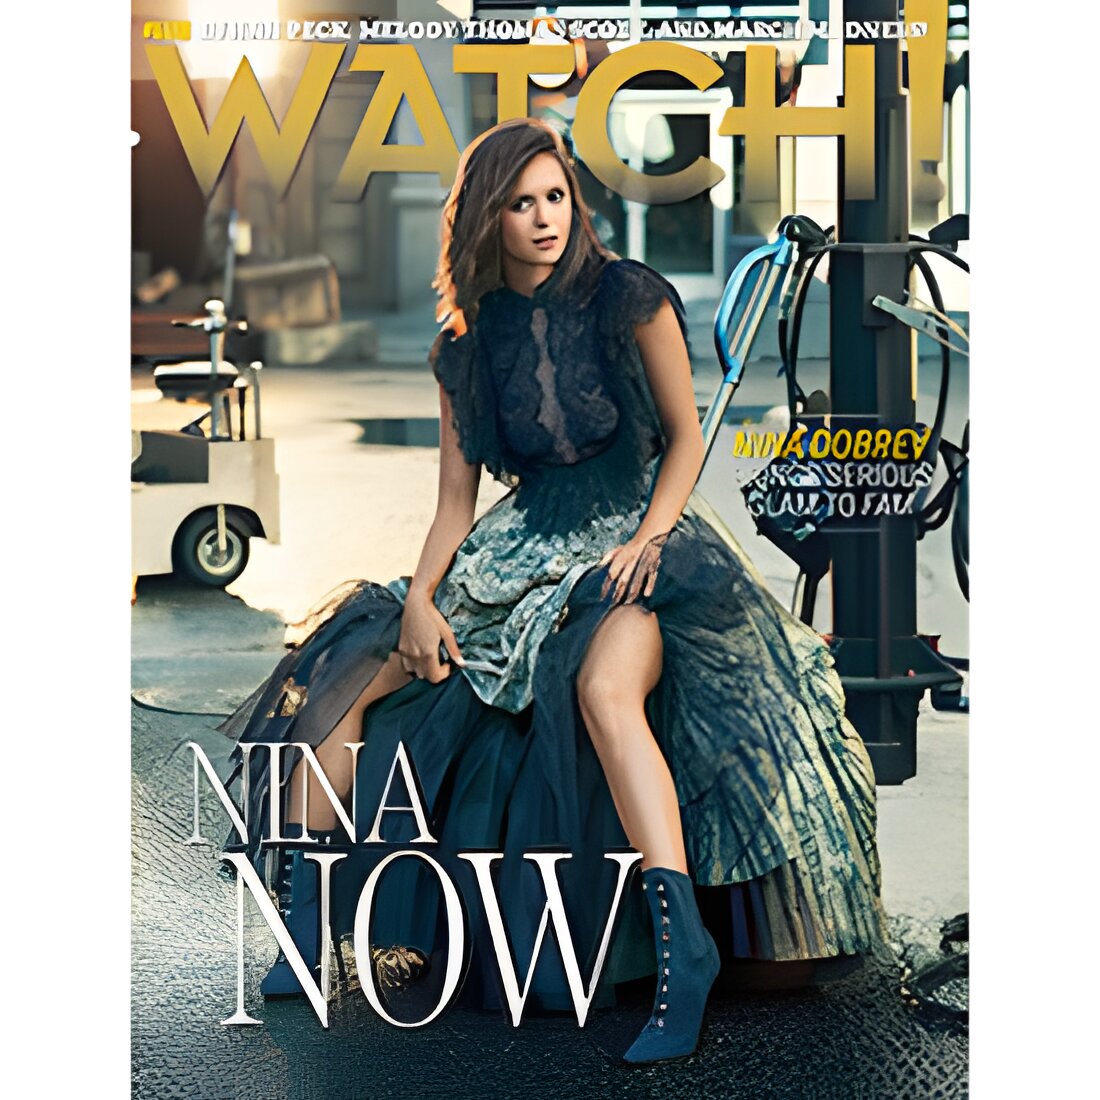 Free 1-Year Subscription To CBS Watch! Magazine